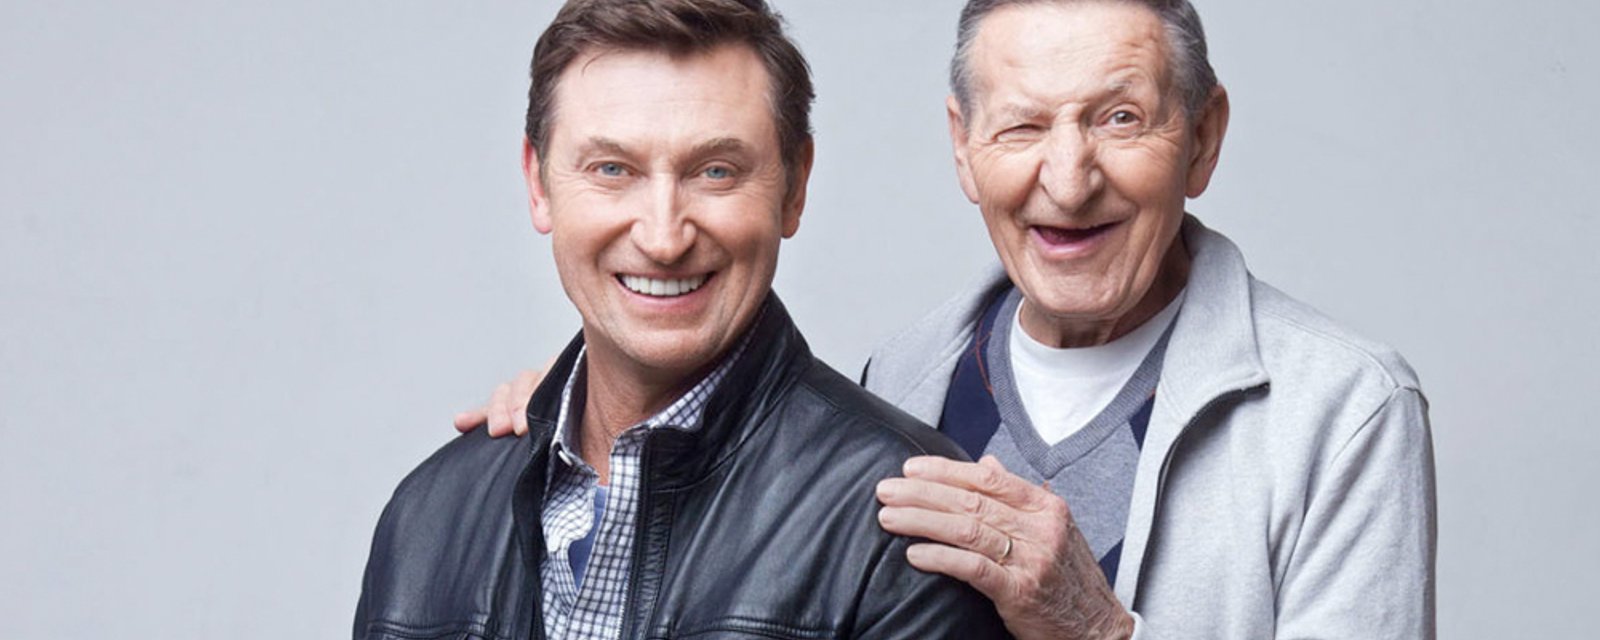 Walter Gretzky has passed away at age 82